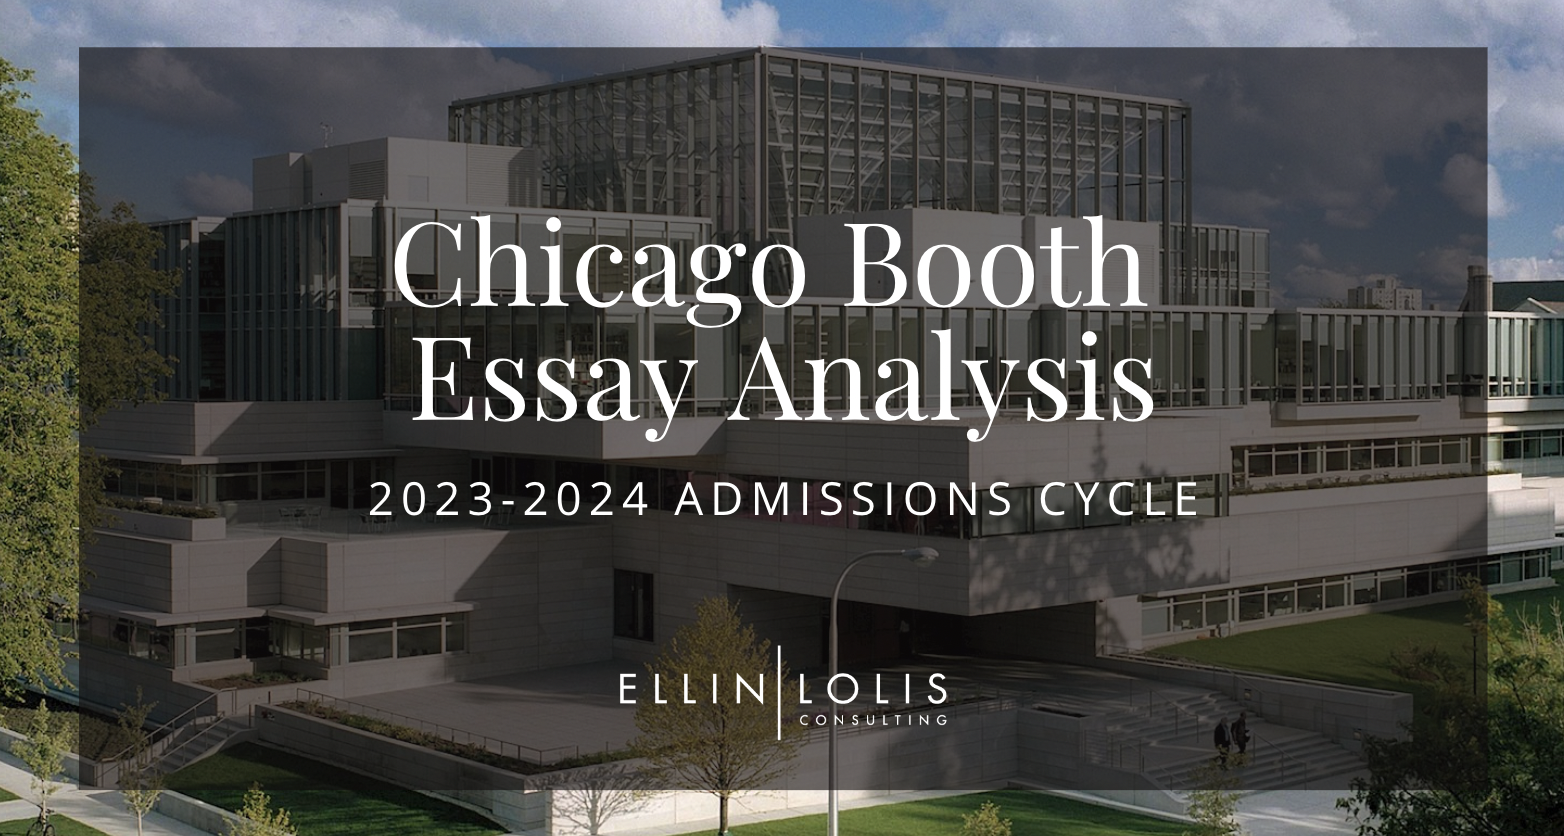 The Chicago Approach: Why Booth 